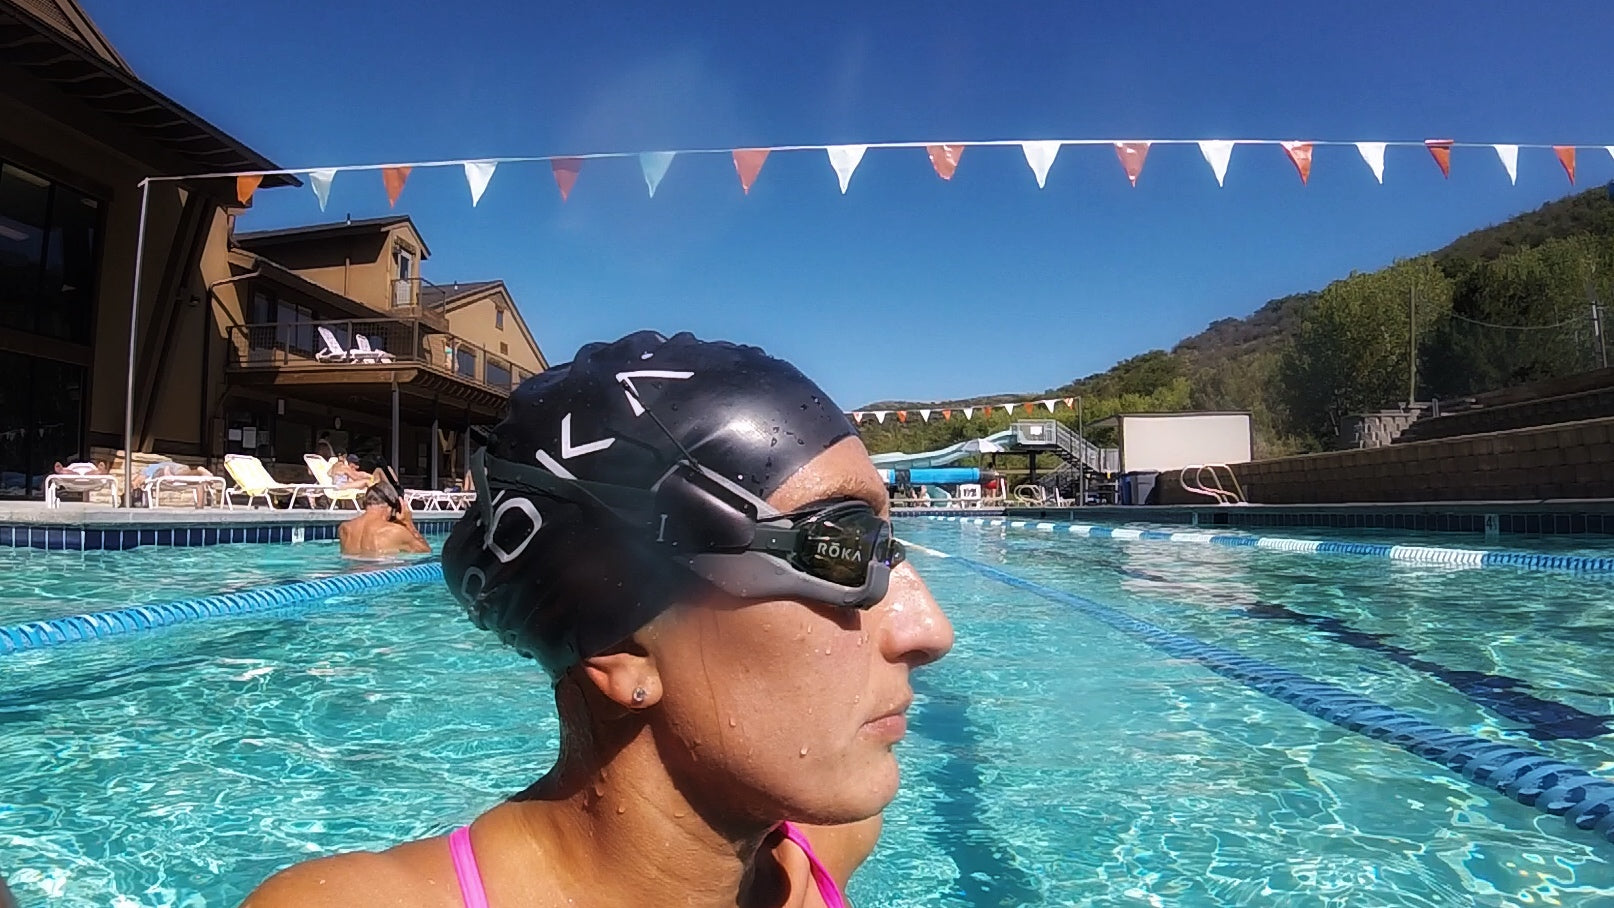 Lauren Brandon, Ironman champion and fastest swimmer trains with her Instabeat to win